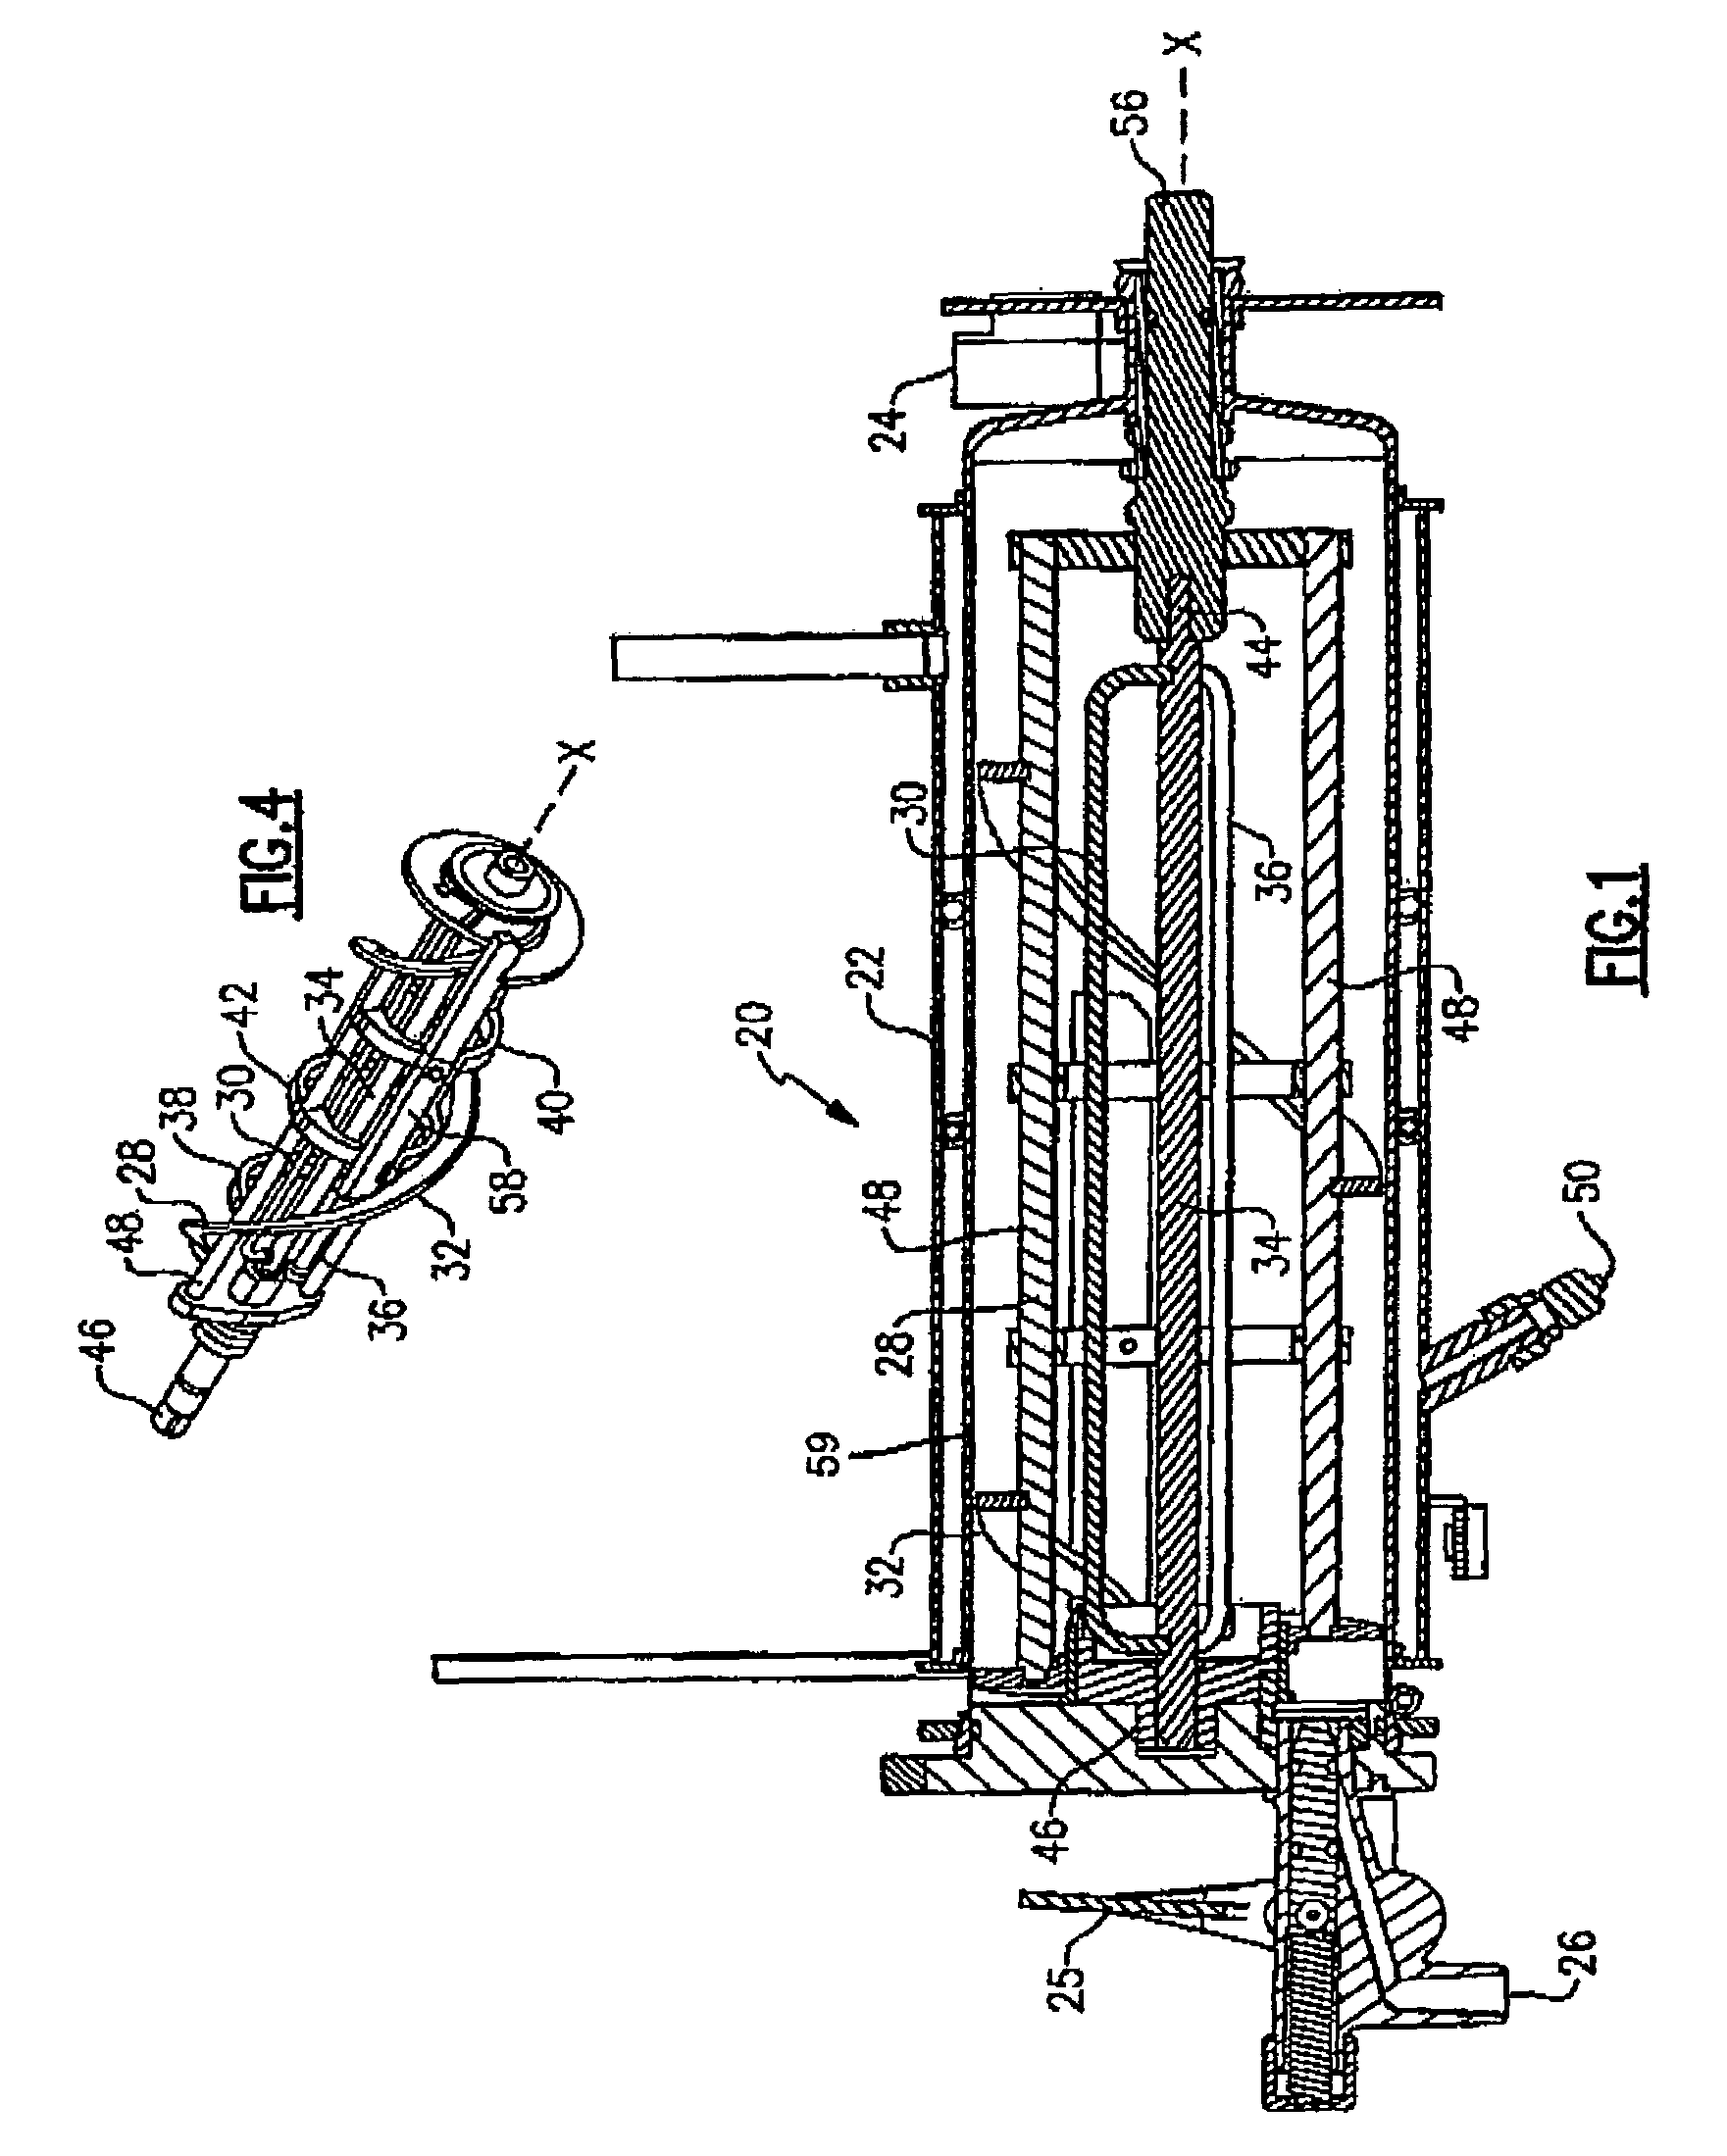 Frozen carbonated beverage apparatus for preparing a low Brix frozen carbonated beverage